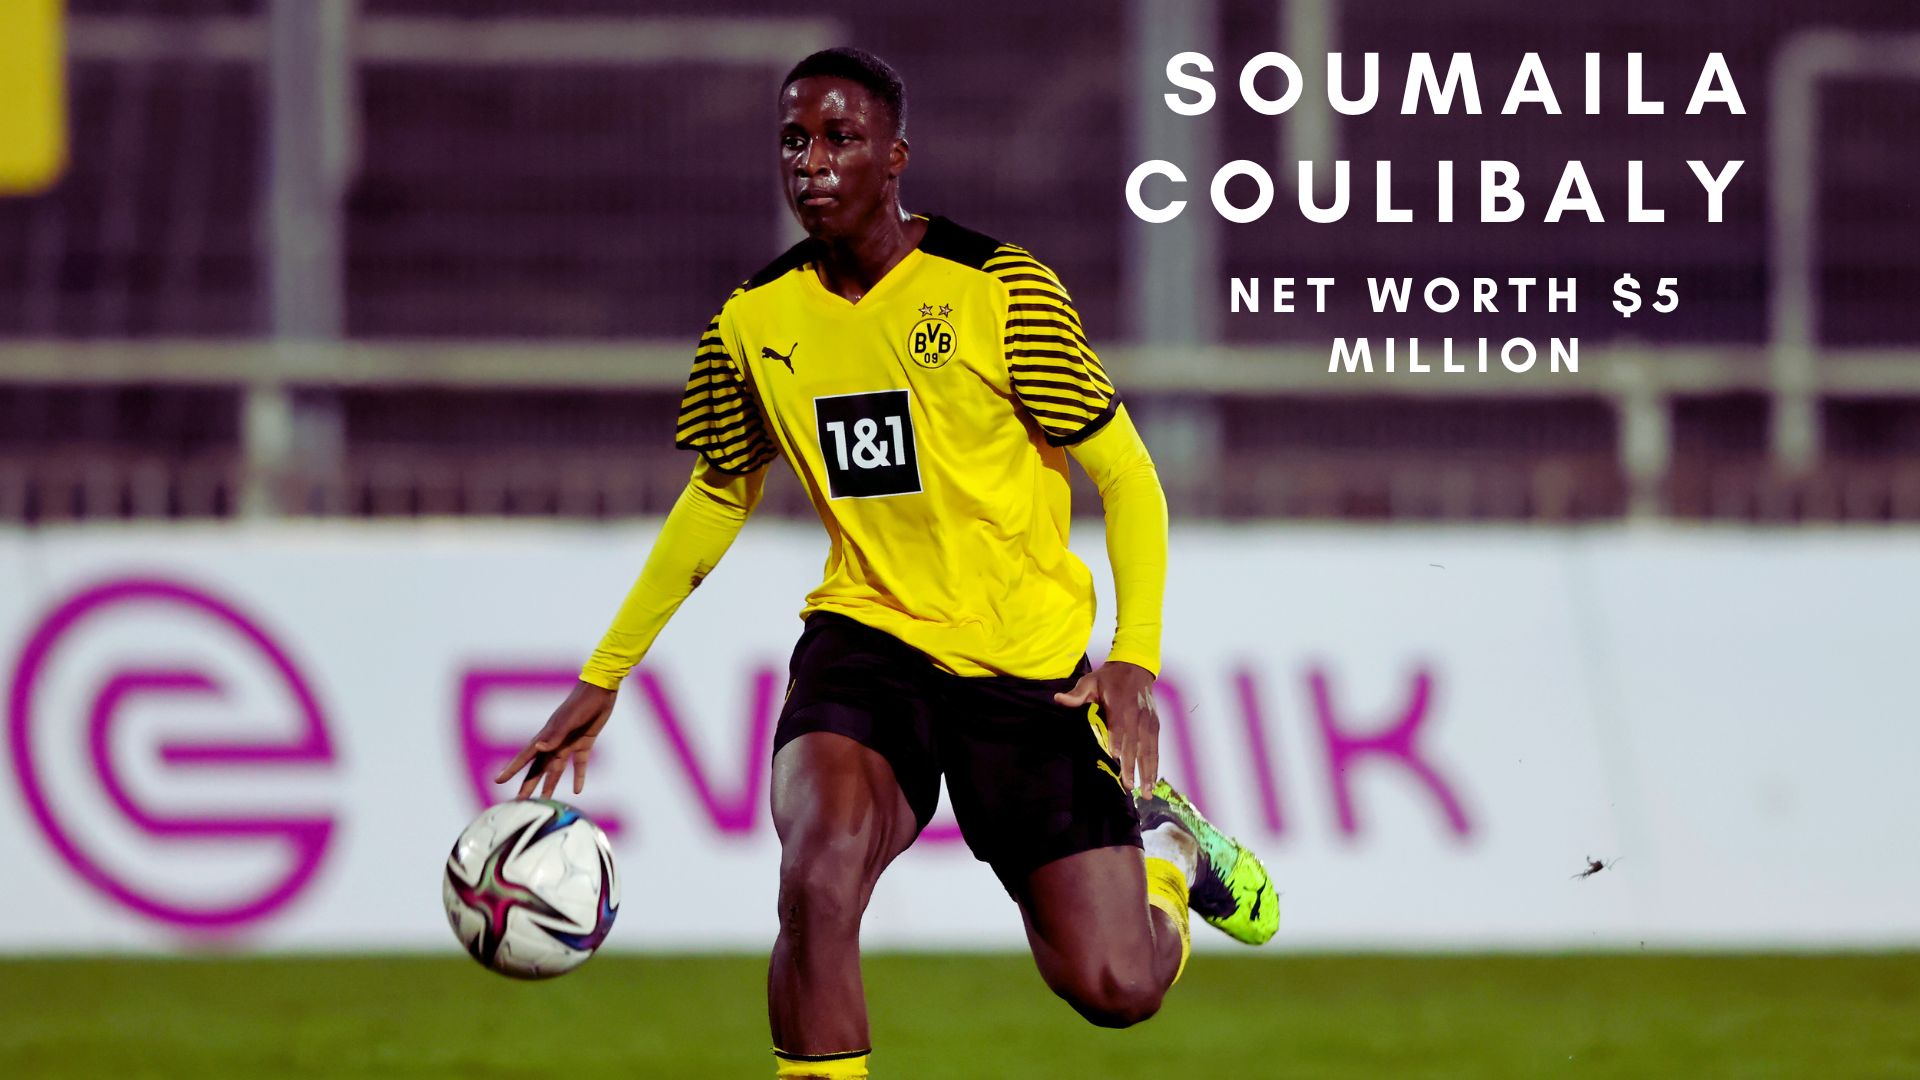 Soumaila Coulibaly of Dortmund runs with the ball.